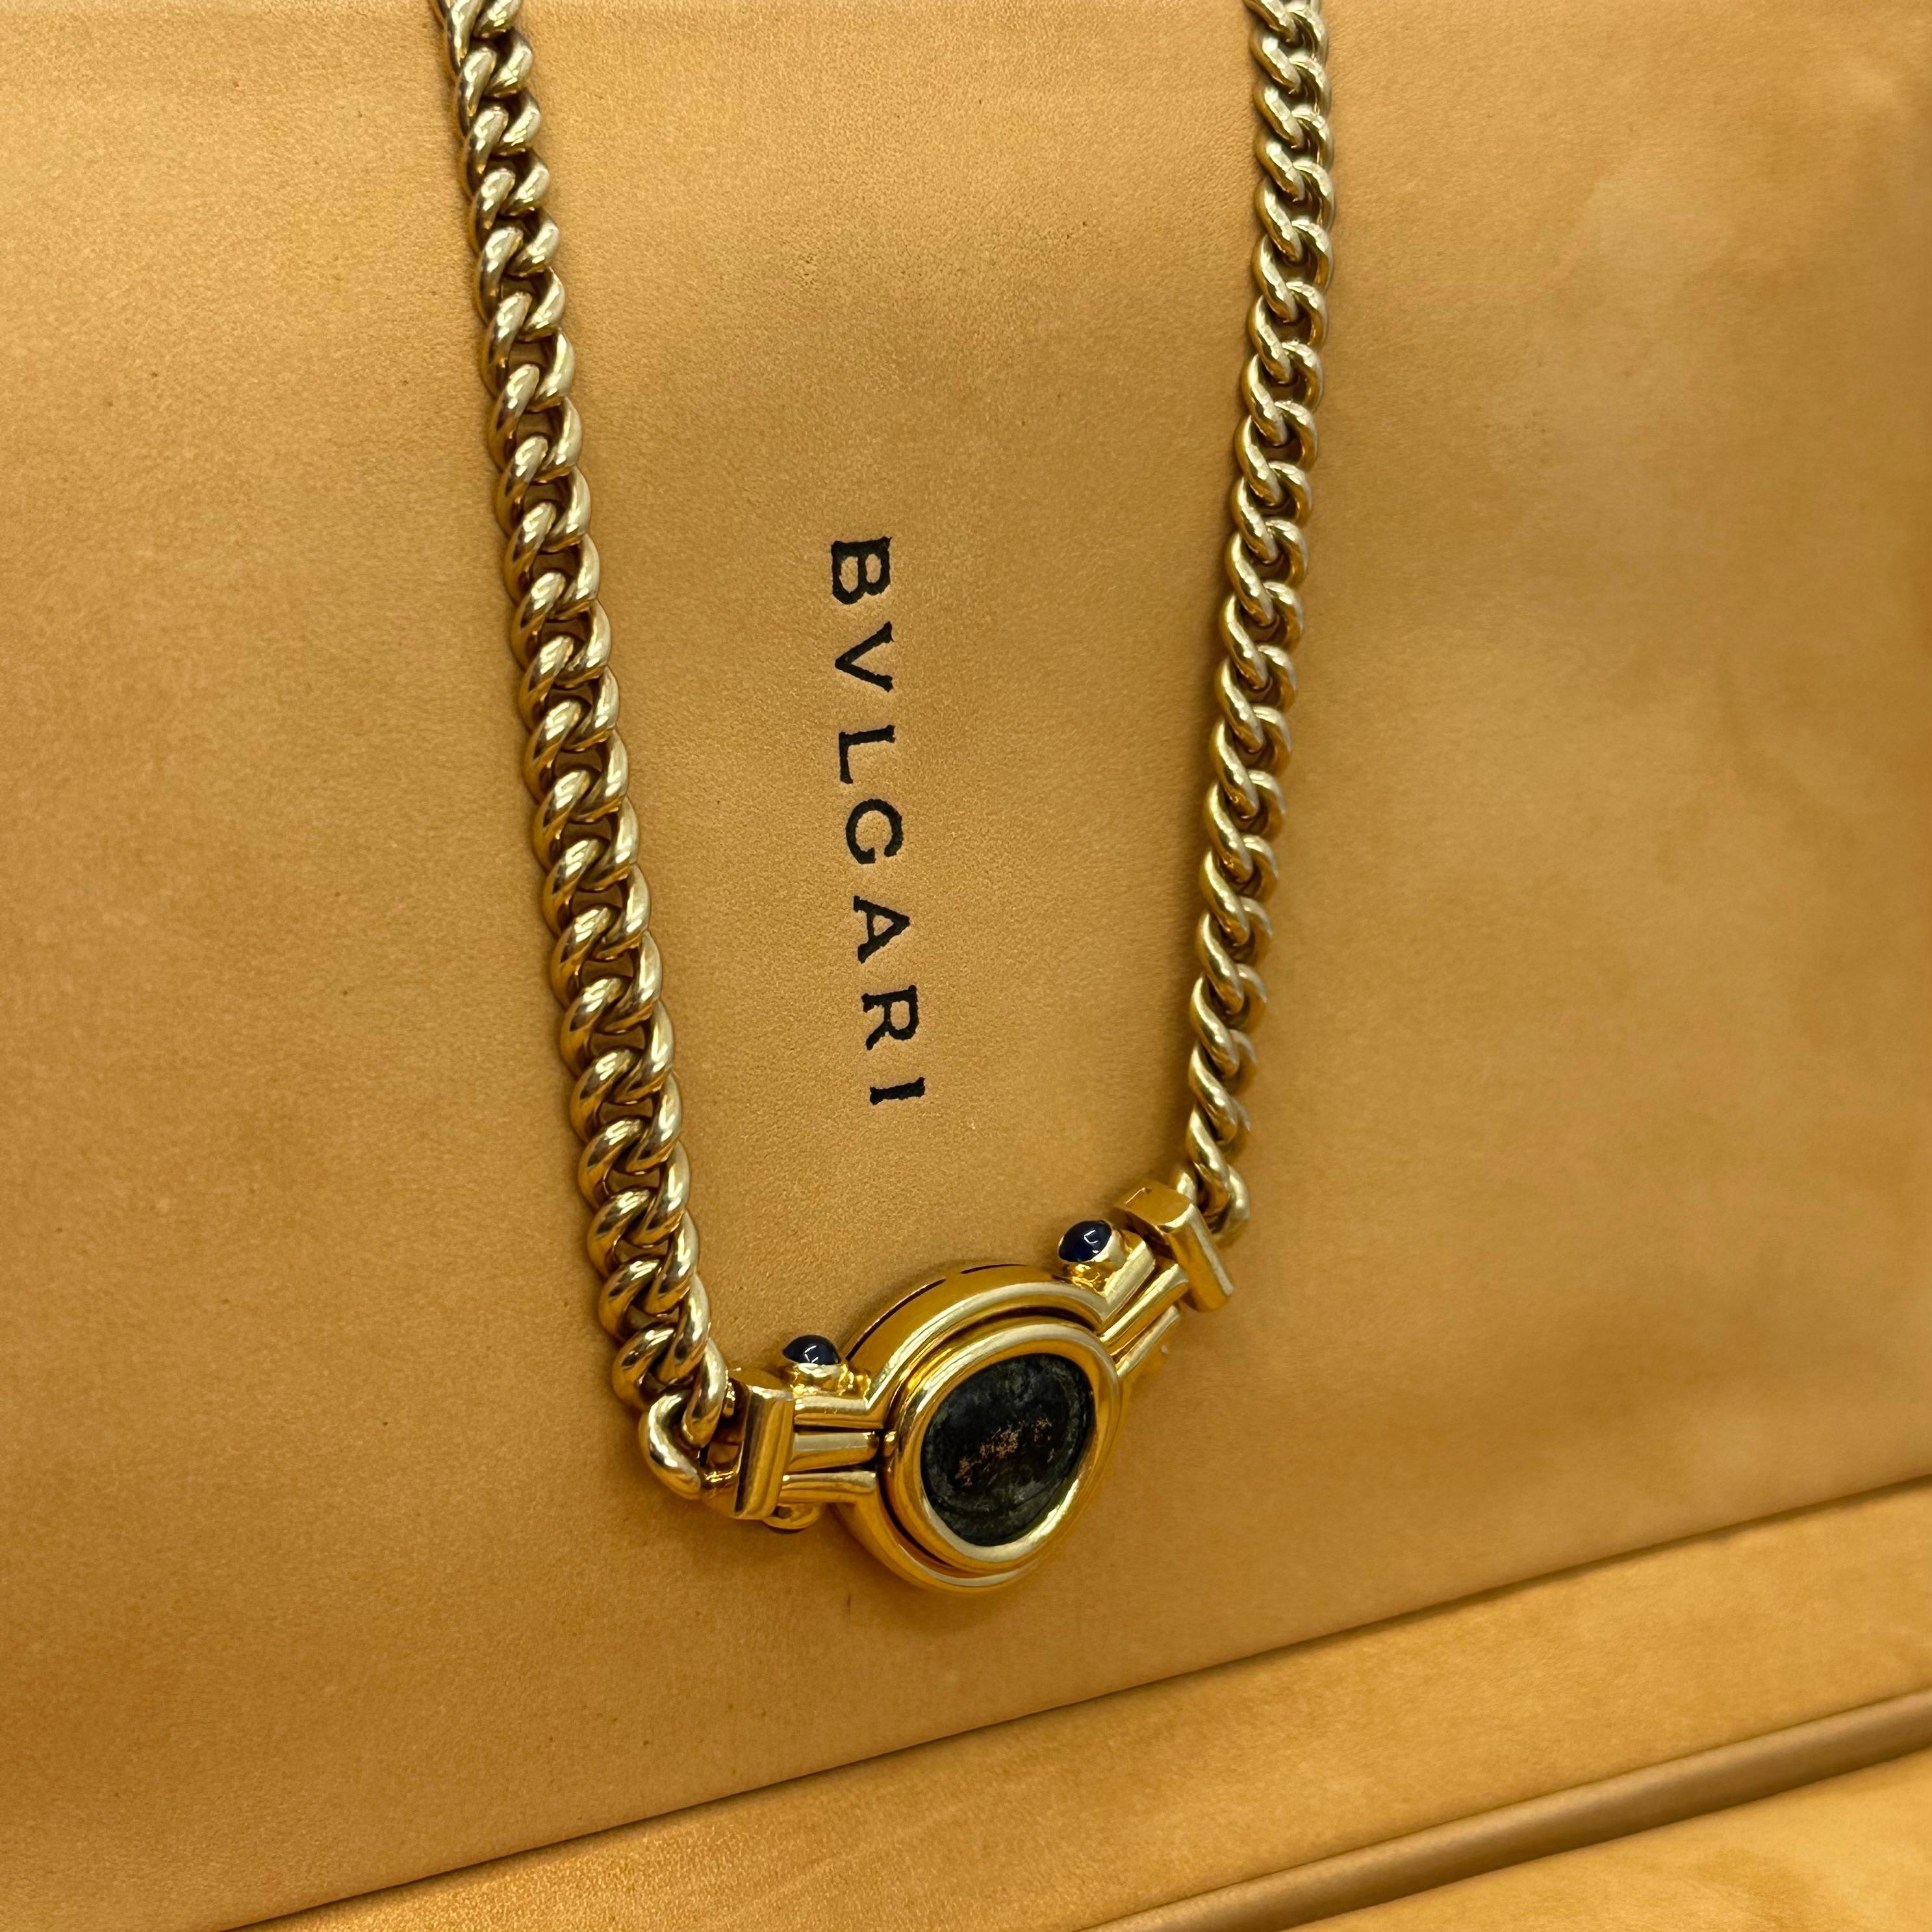 BVLGARI Ancient Coin Necklace
18k Yellow Gold 
18.5 Inches Length
66.3 g Total Weight 
Pendant 25 mm x 20 mm diameter
Four cabochon sapphires bezel set.
Designed as a 18k Yellow Gold Curb Link Necklace the front with bezel set ancient coin, the